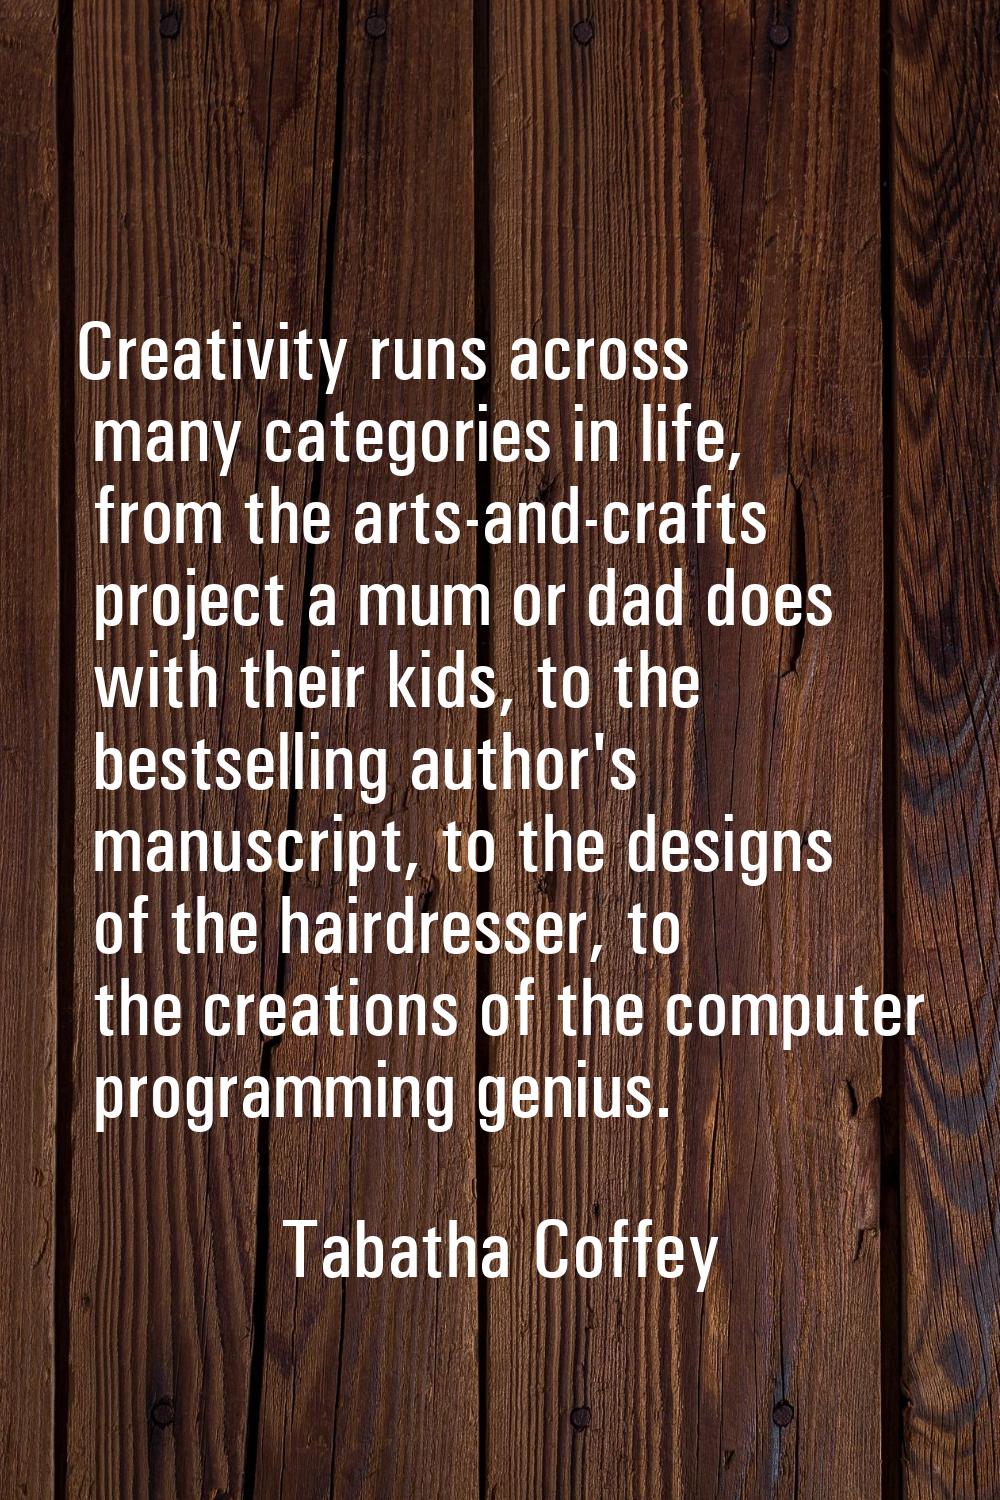 Creativity runs across many categories in life, from the arts-and-crafts project a mum or dad does 